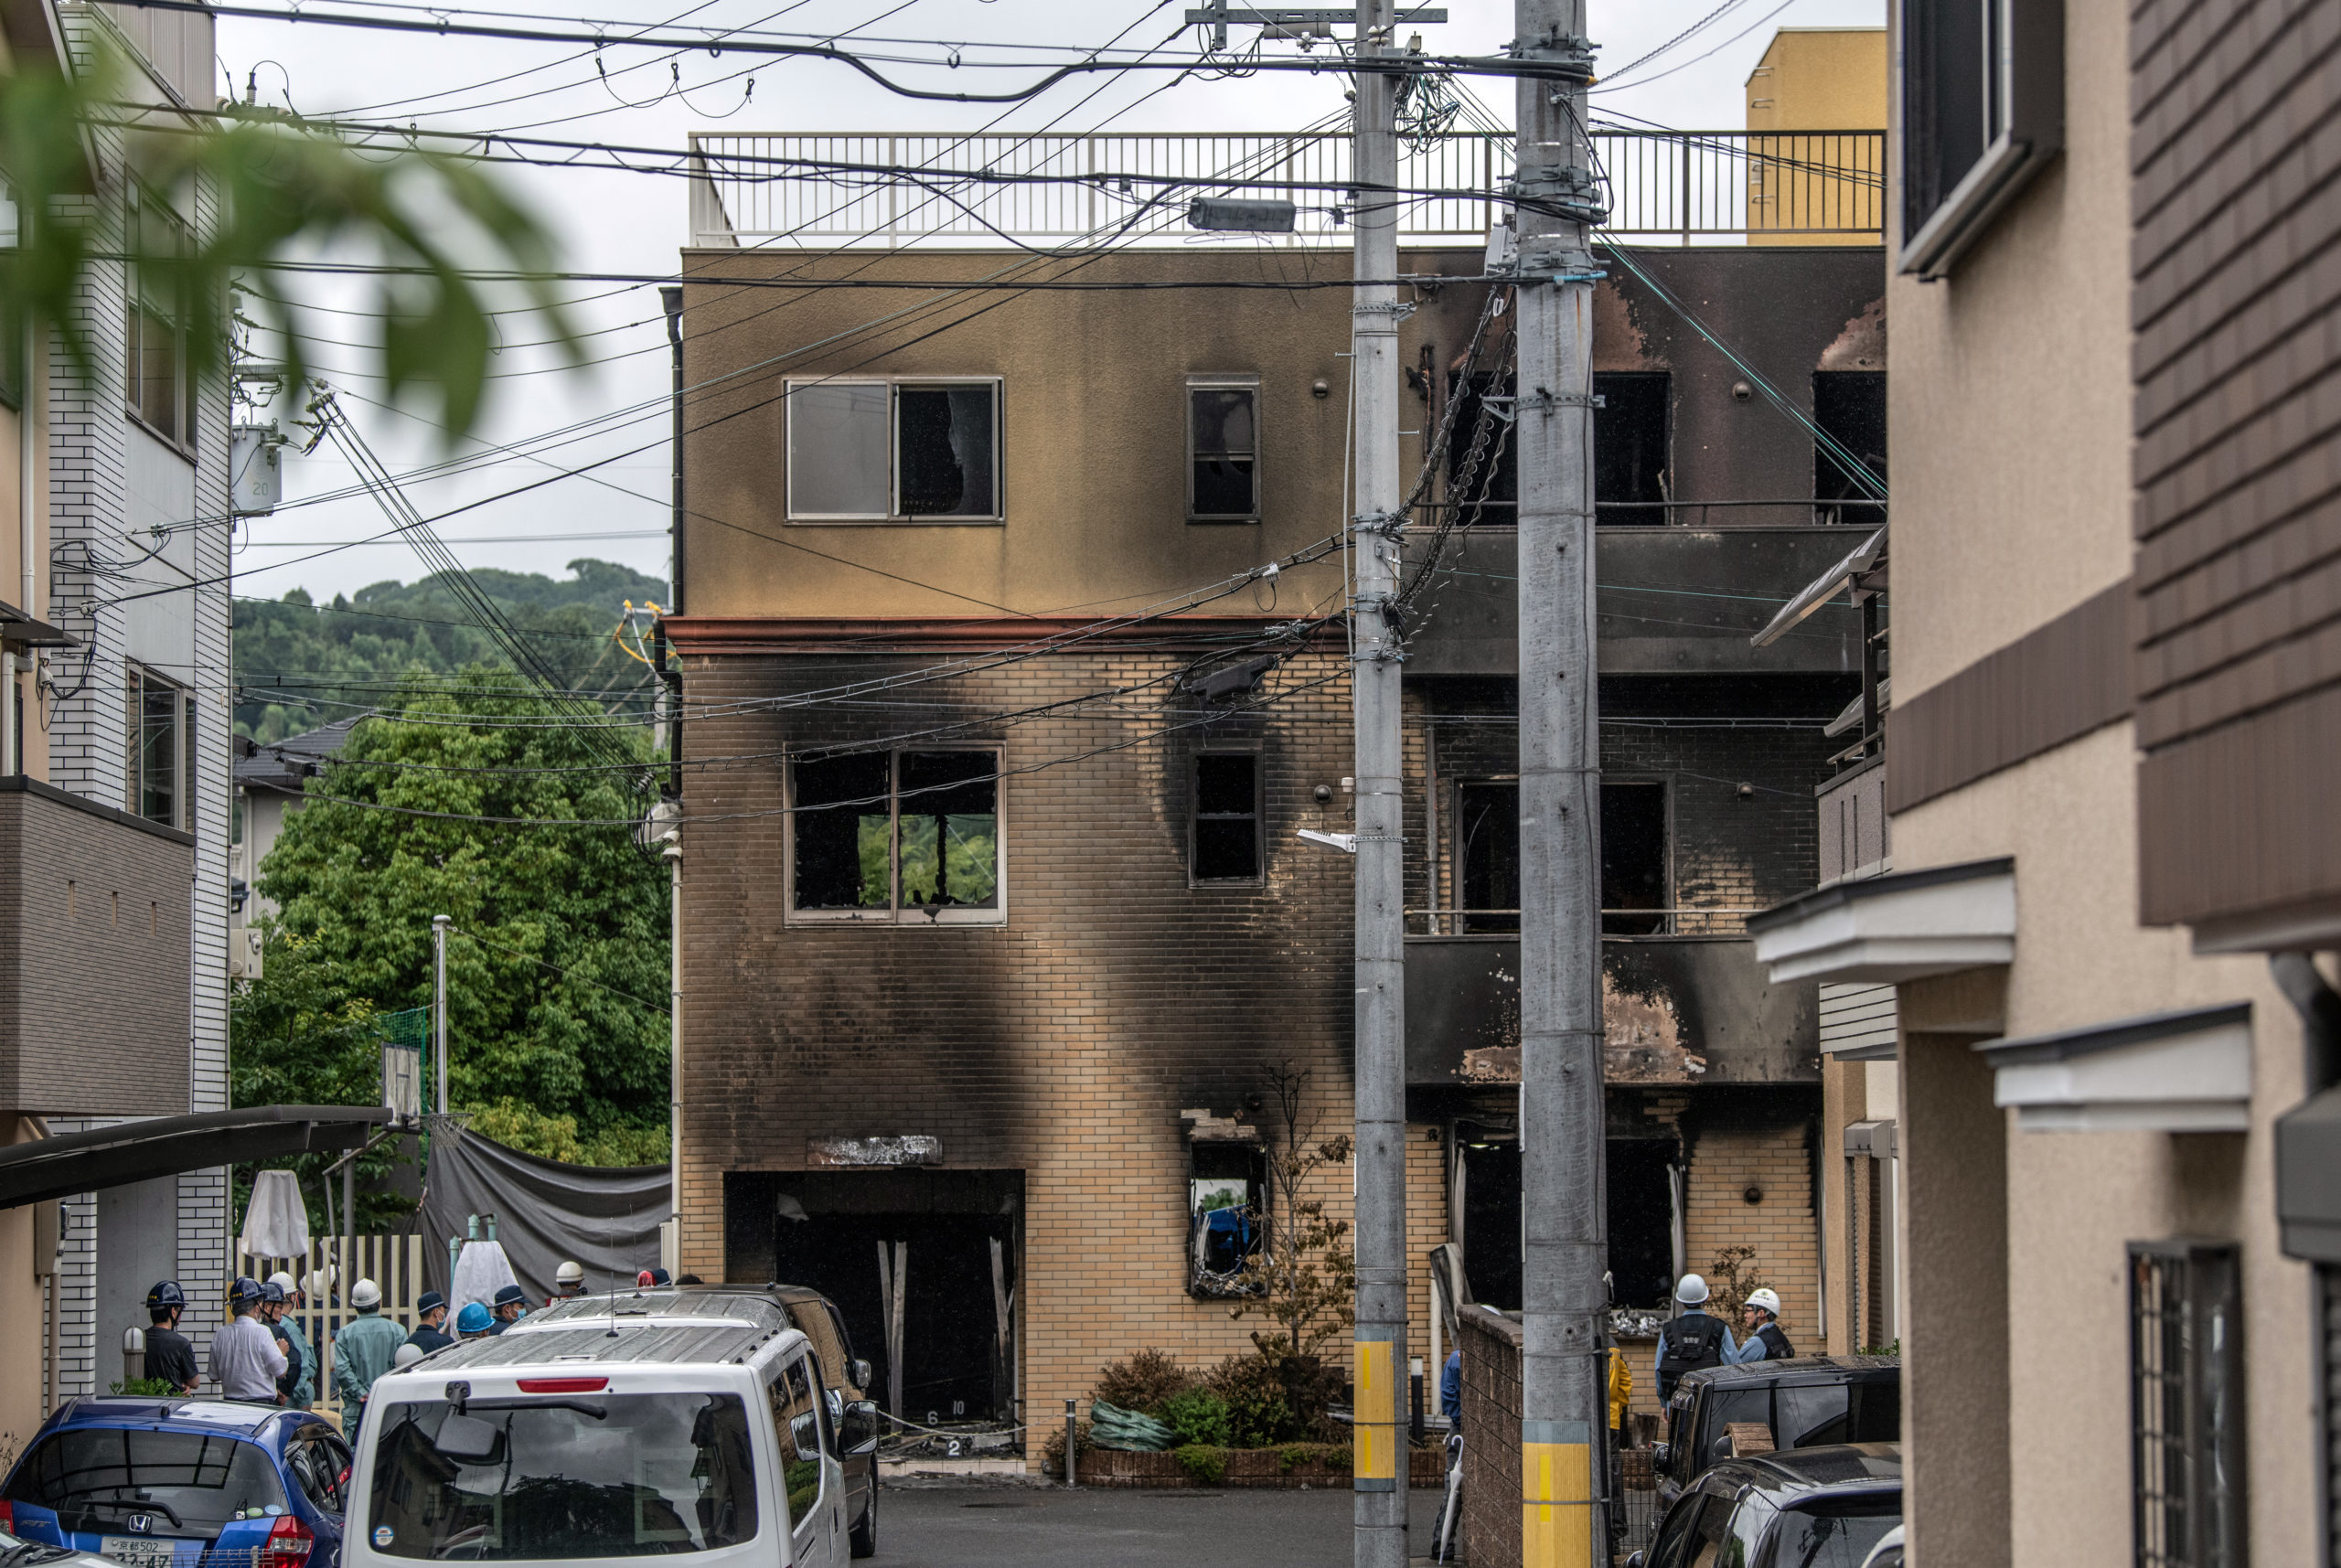 The Kyoto Animation Co studio building is pictured after being set ablaze by an arsonist on July 19, 2019 in Kyoto, Japan. Thirty three people are believed dead and dozens injured after a suspected arson attack on the animation studio. Police were quoted by local media as saying a 41 year-old man broke into the Kyoto Animation Co studio on Thursday morning and sprayed petrol before igniting it. Japan's Prime Minister Shinzo Abe described the incident as 'too appalling for words'. (Photo by Carl Court/Getty Images)